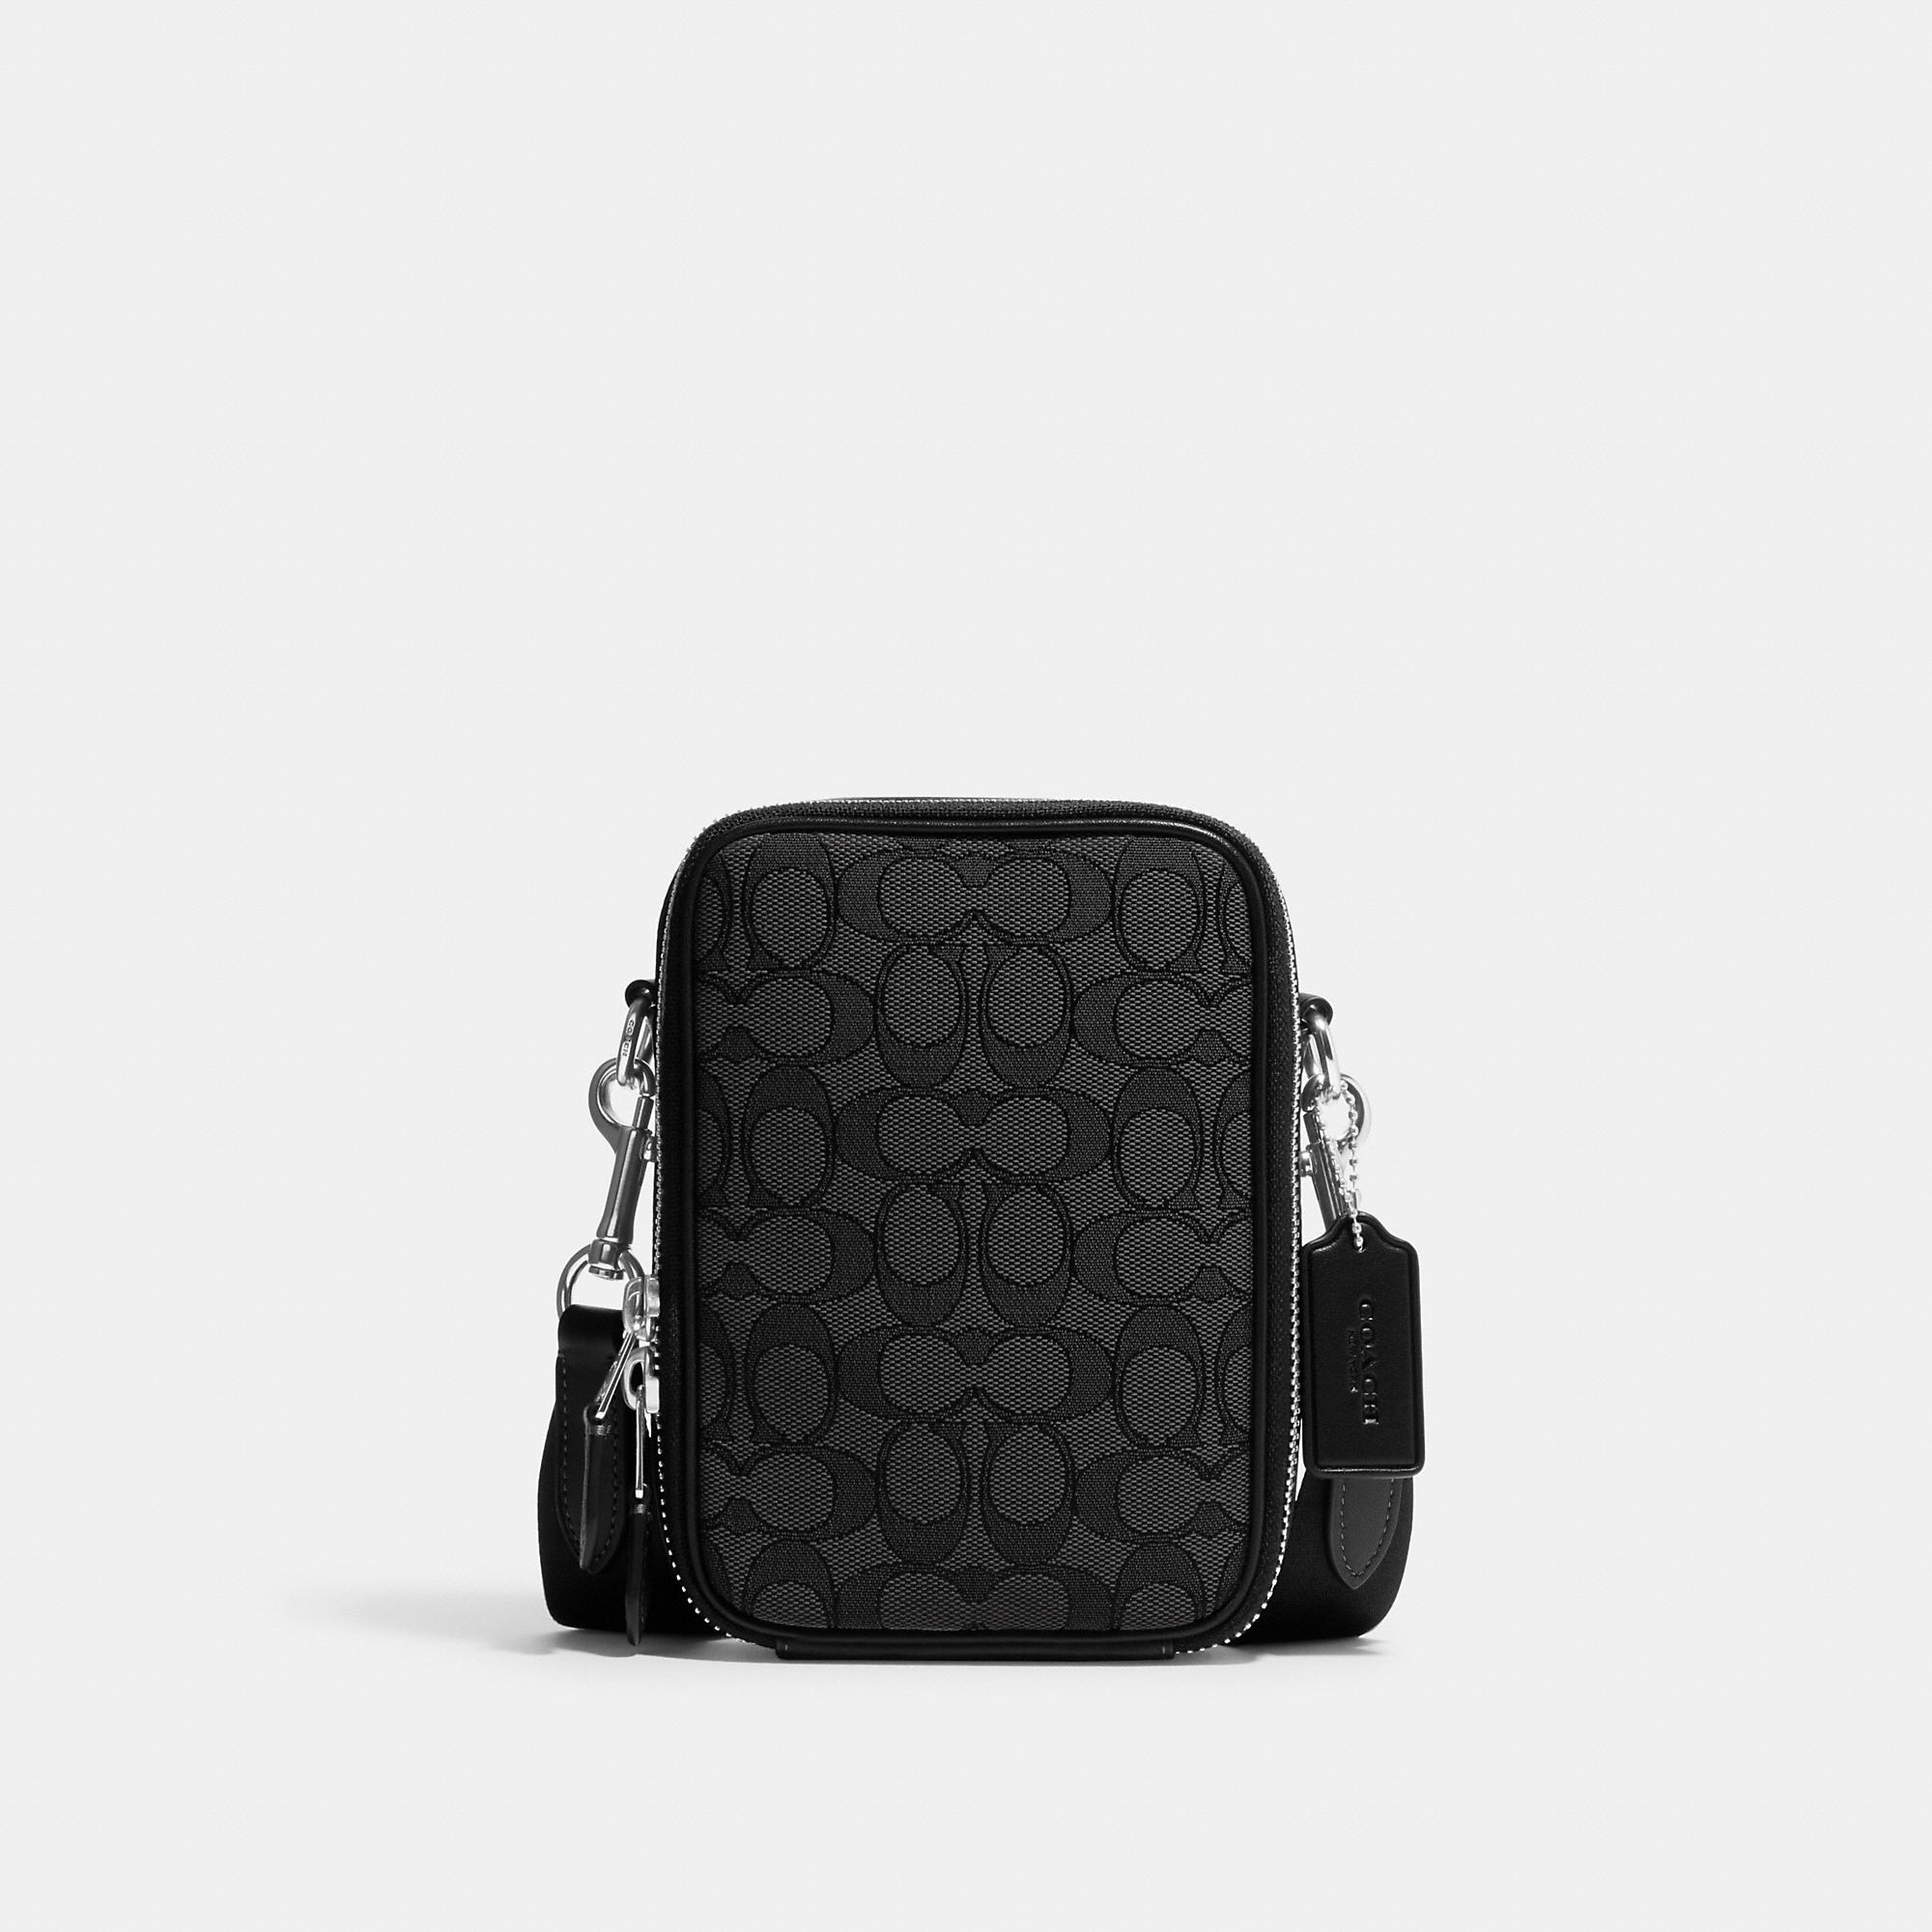 Coach Outlet Stanton Crossbody In Signature Jacquard In Black